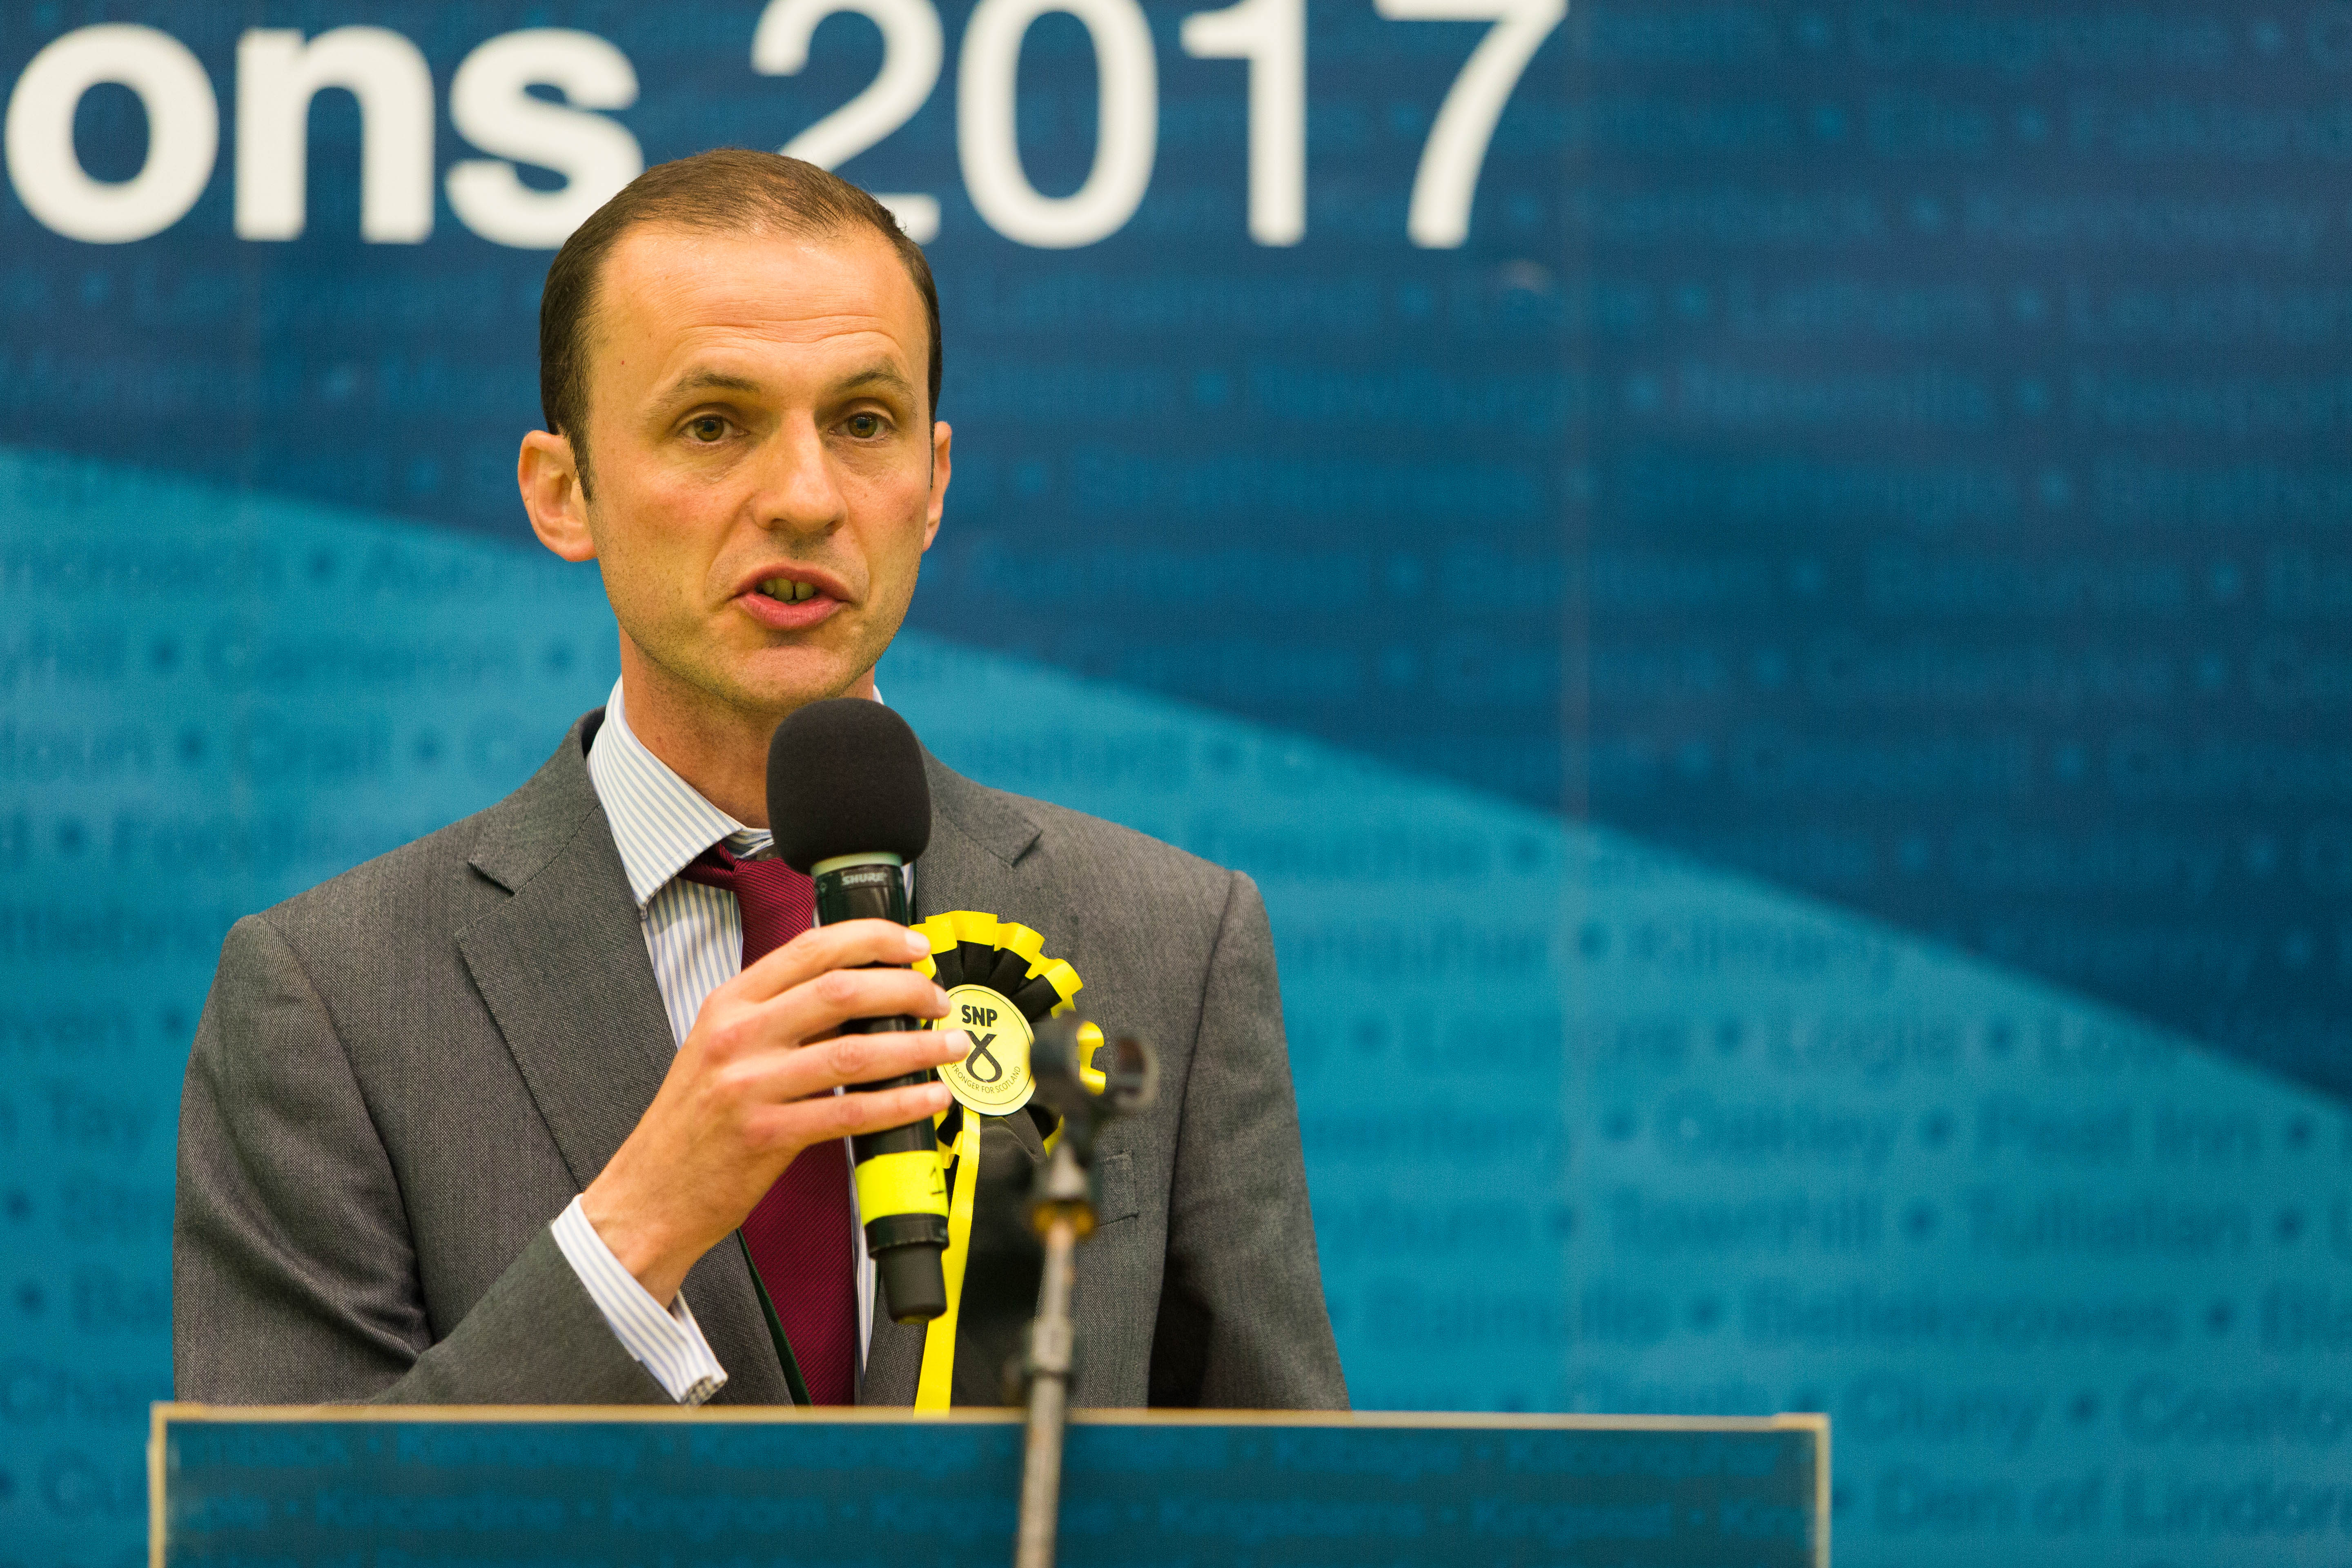 Stephen Gethins MP at the 2017 general election count.